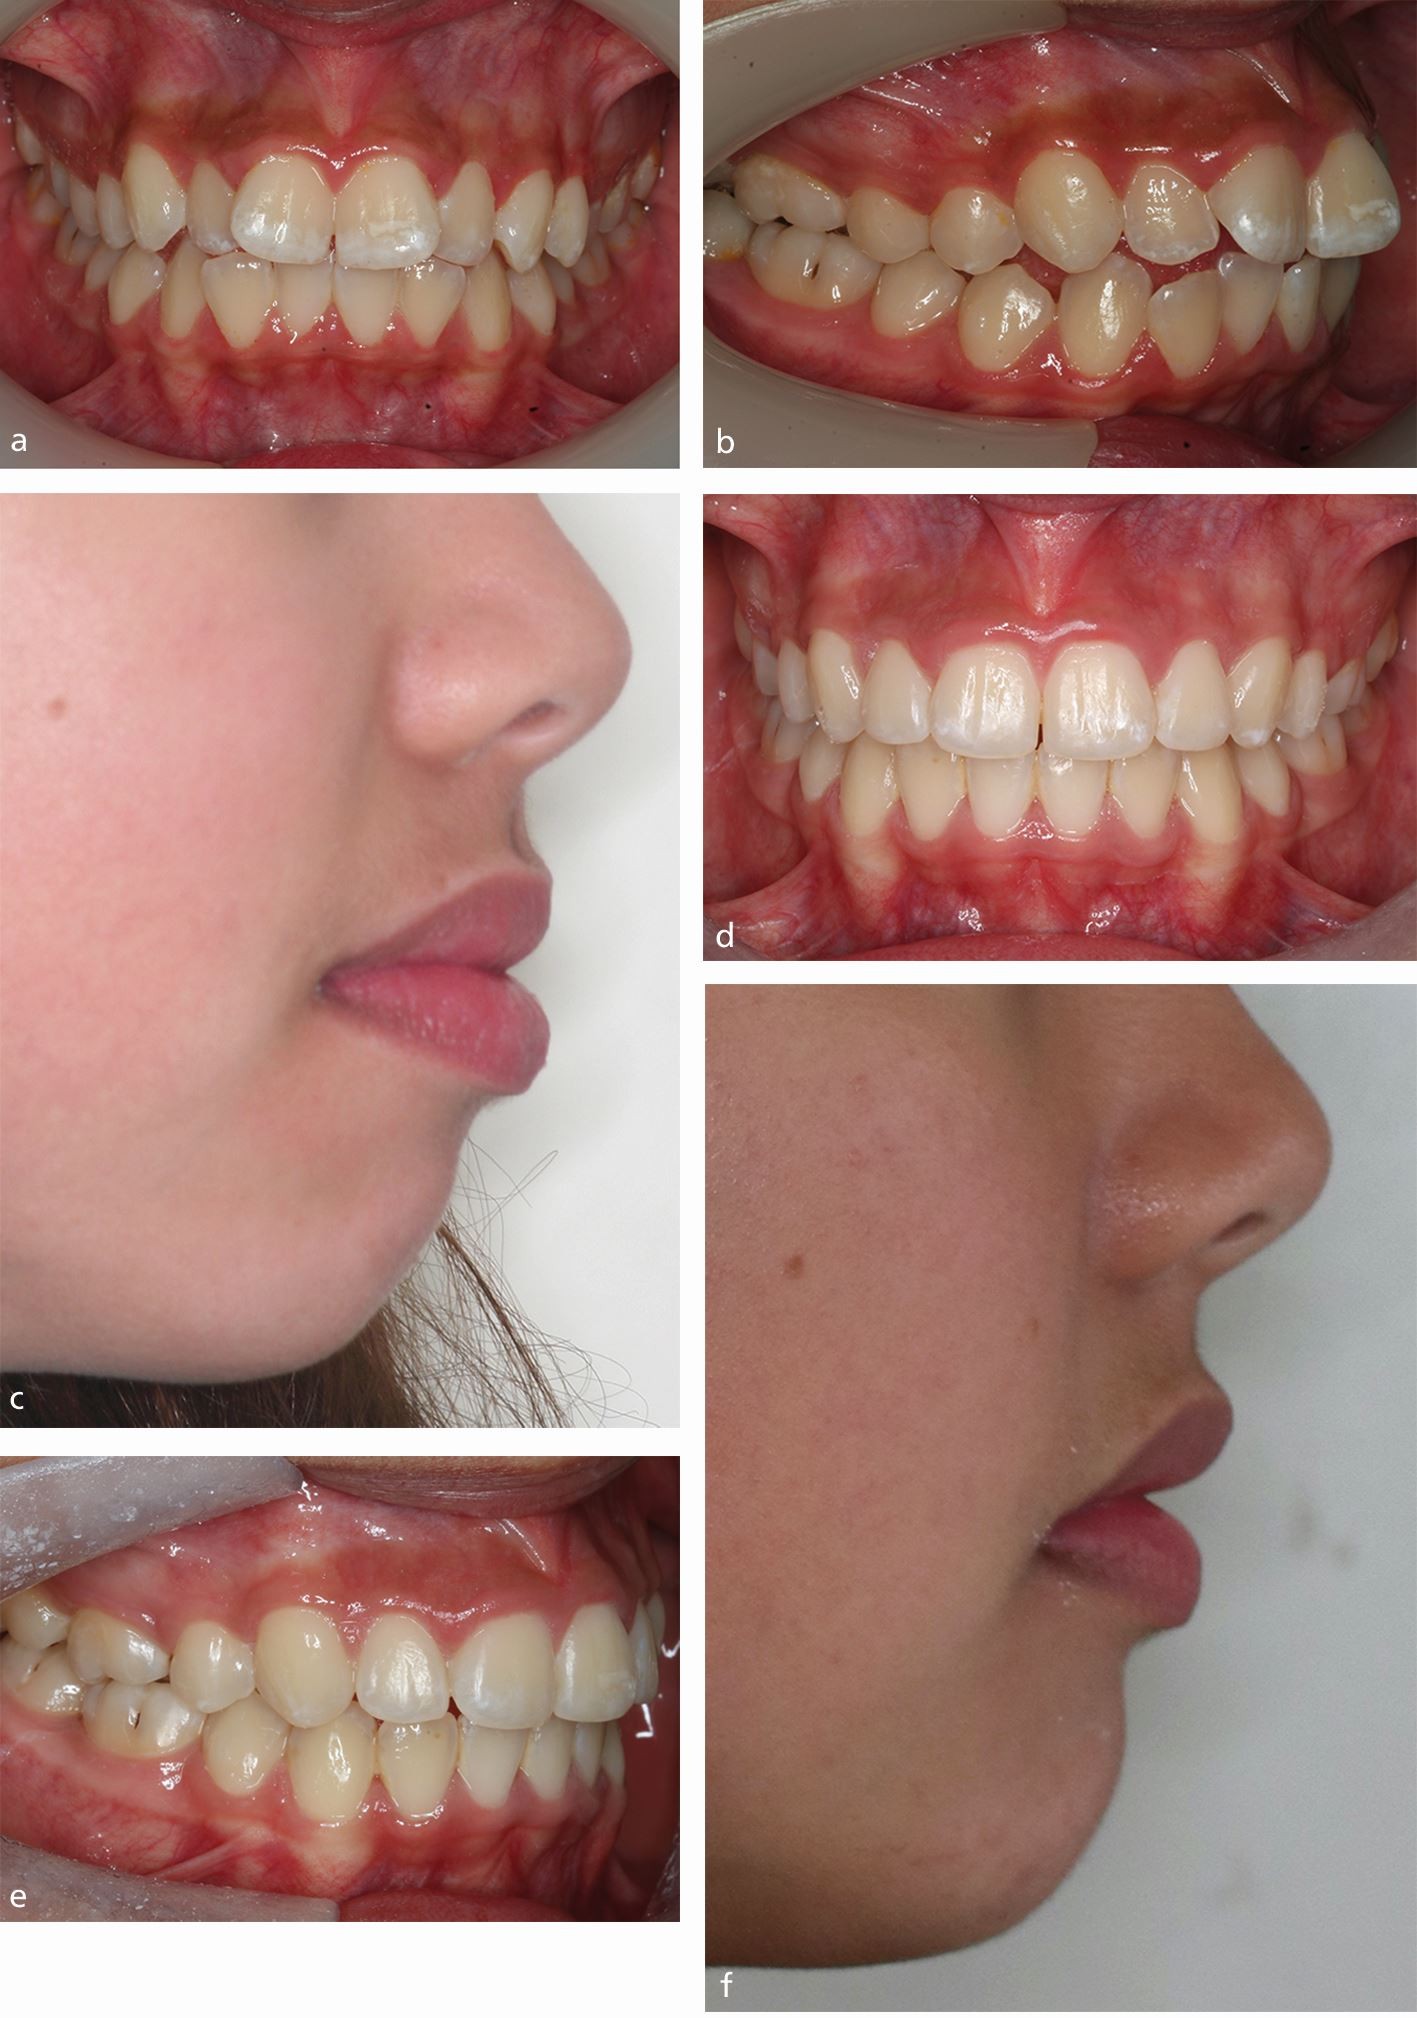 Stability of a severe Class II malocclusion correction in a